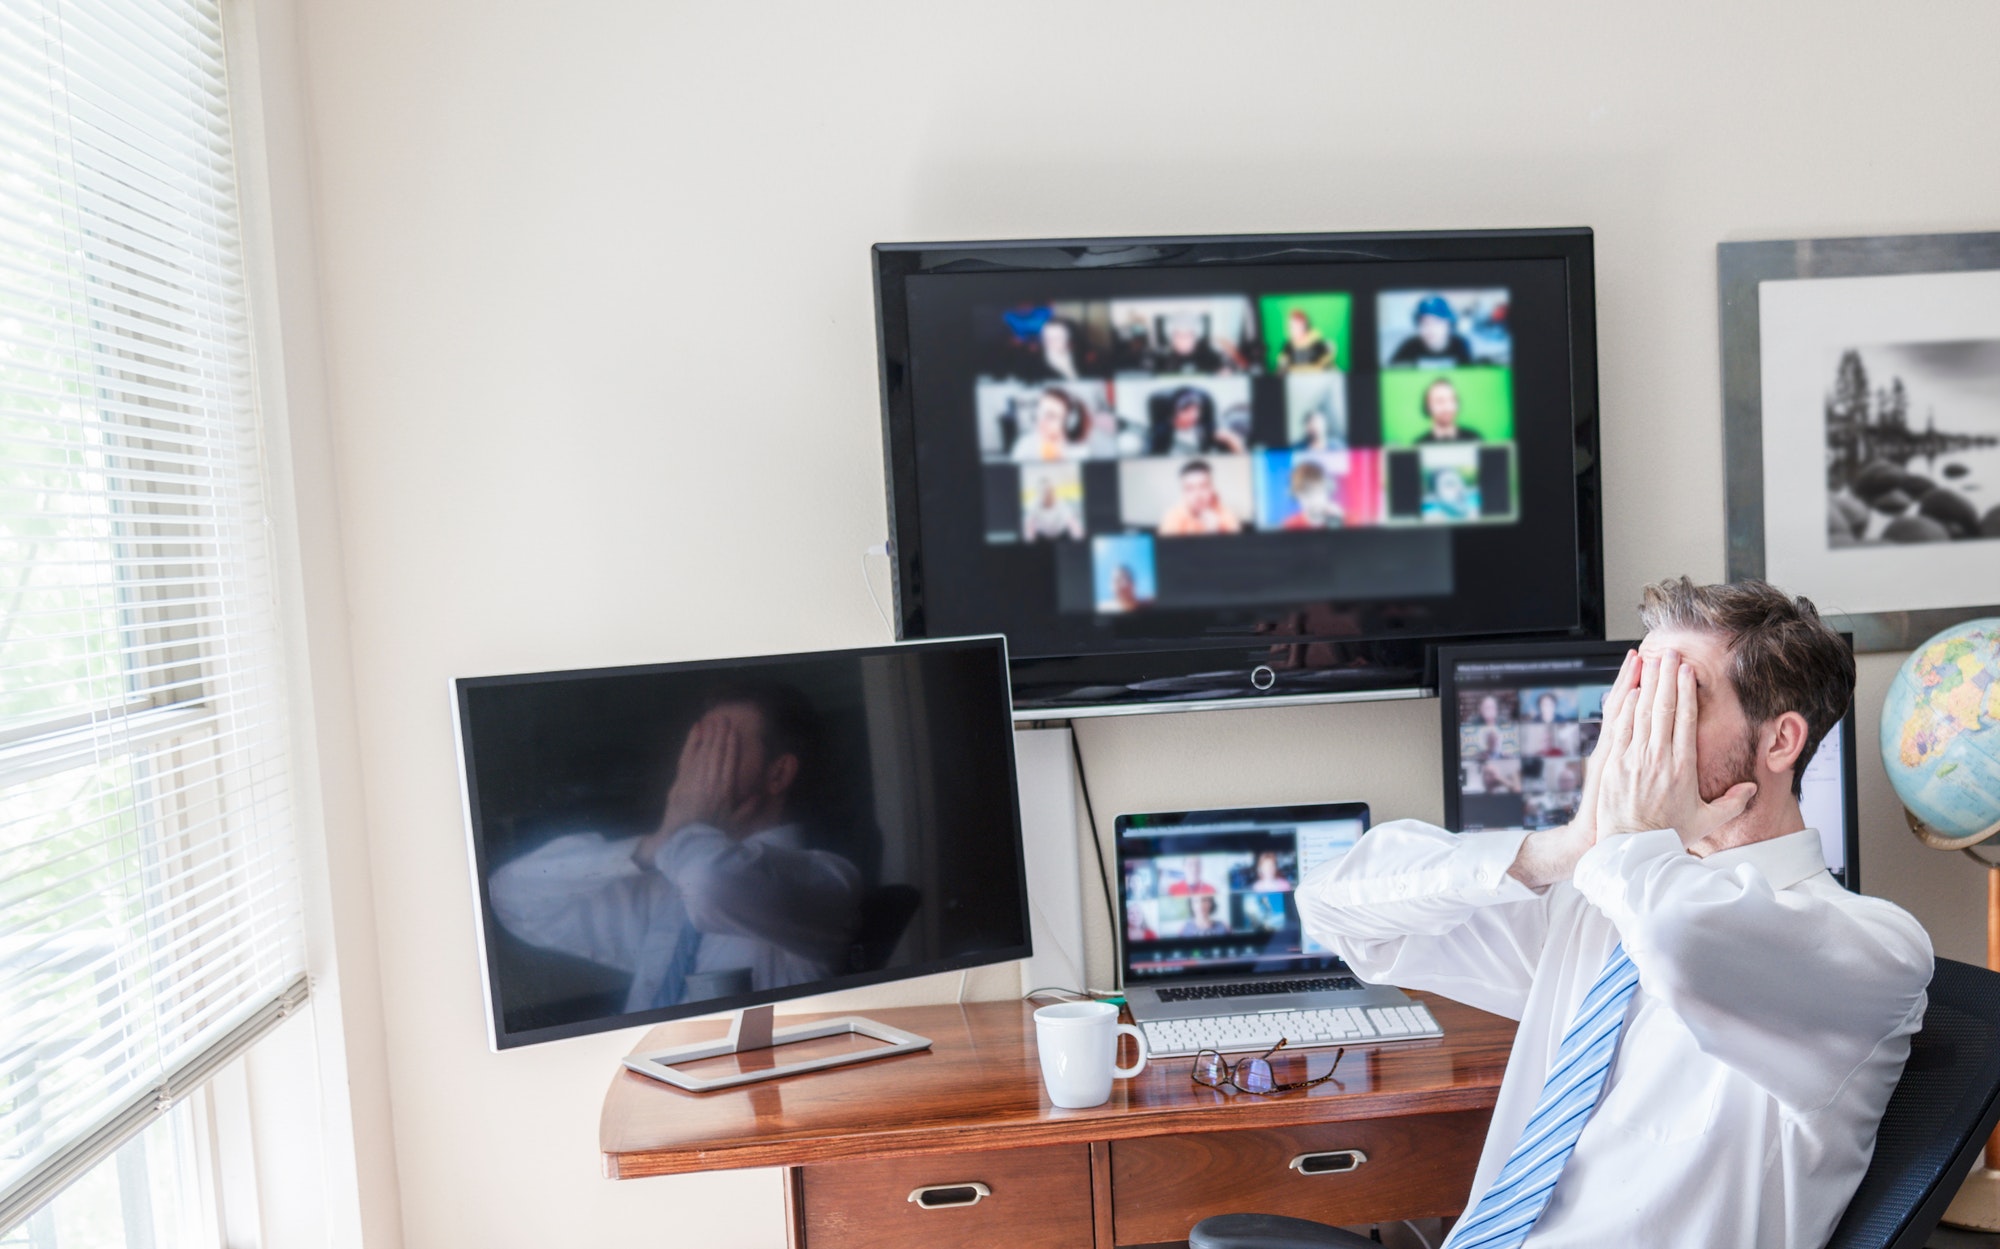 Man working with team via video chat, with heads in hands looking stressed